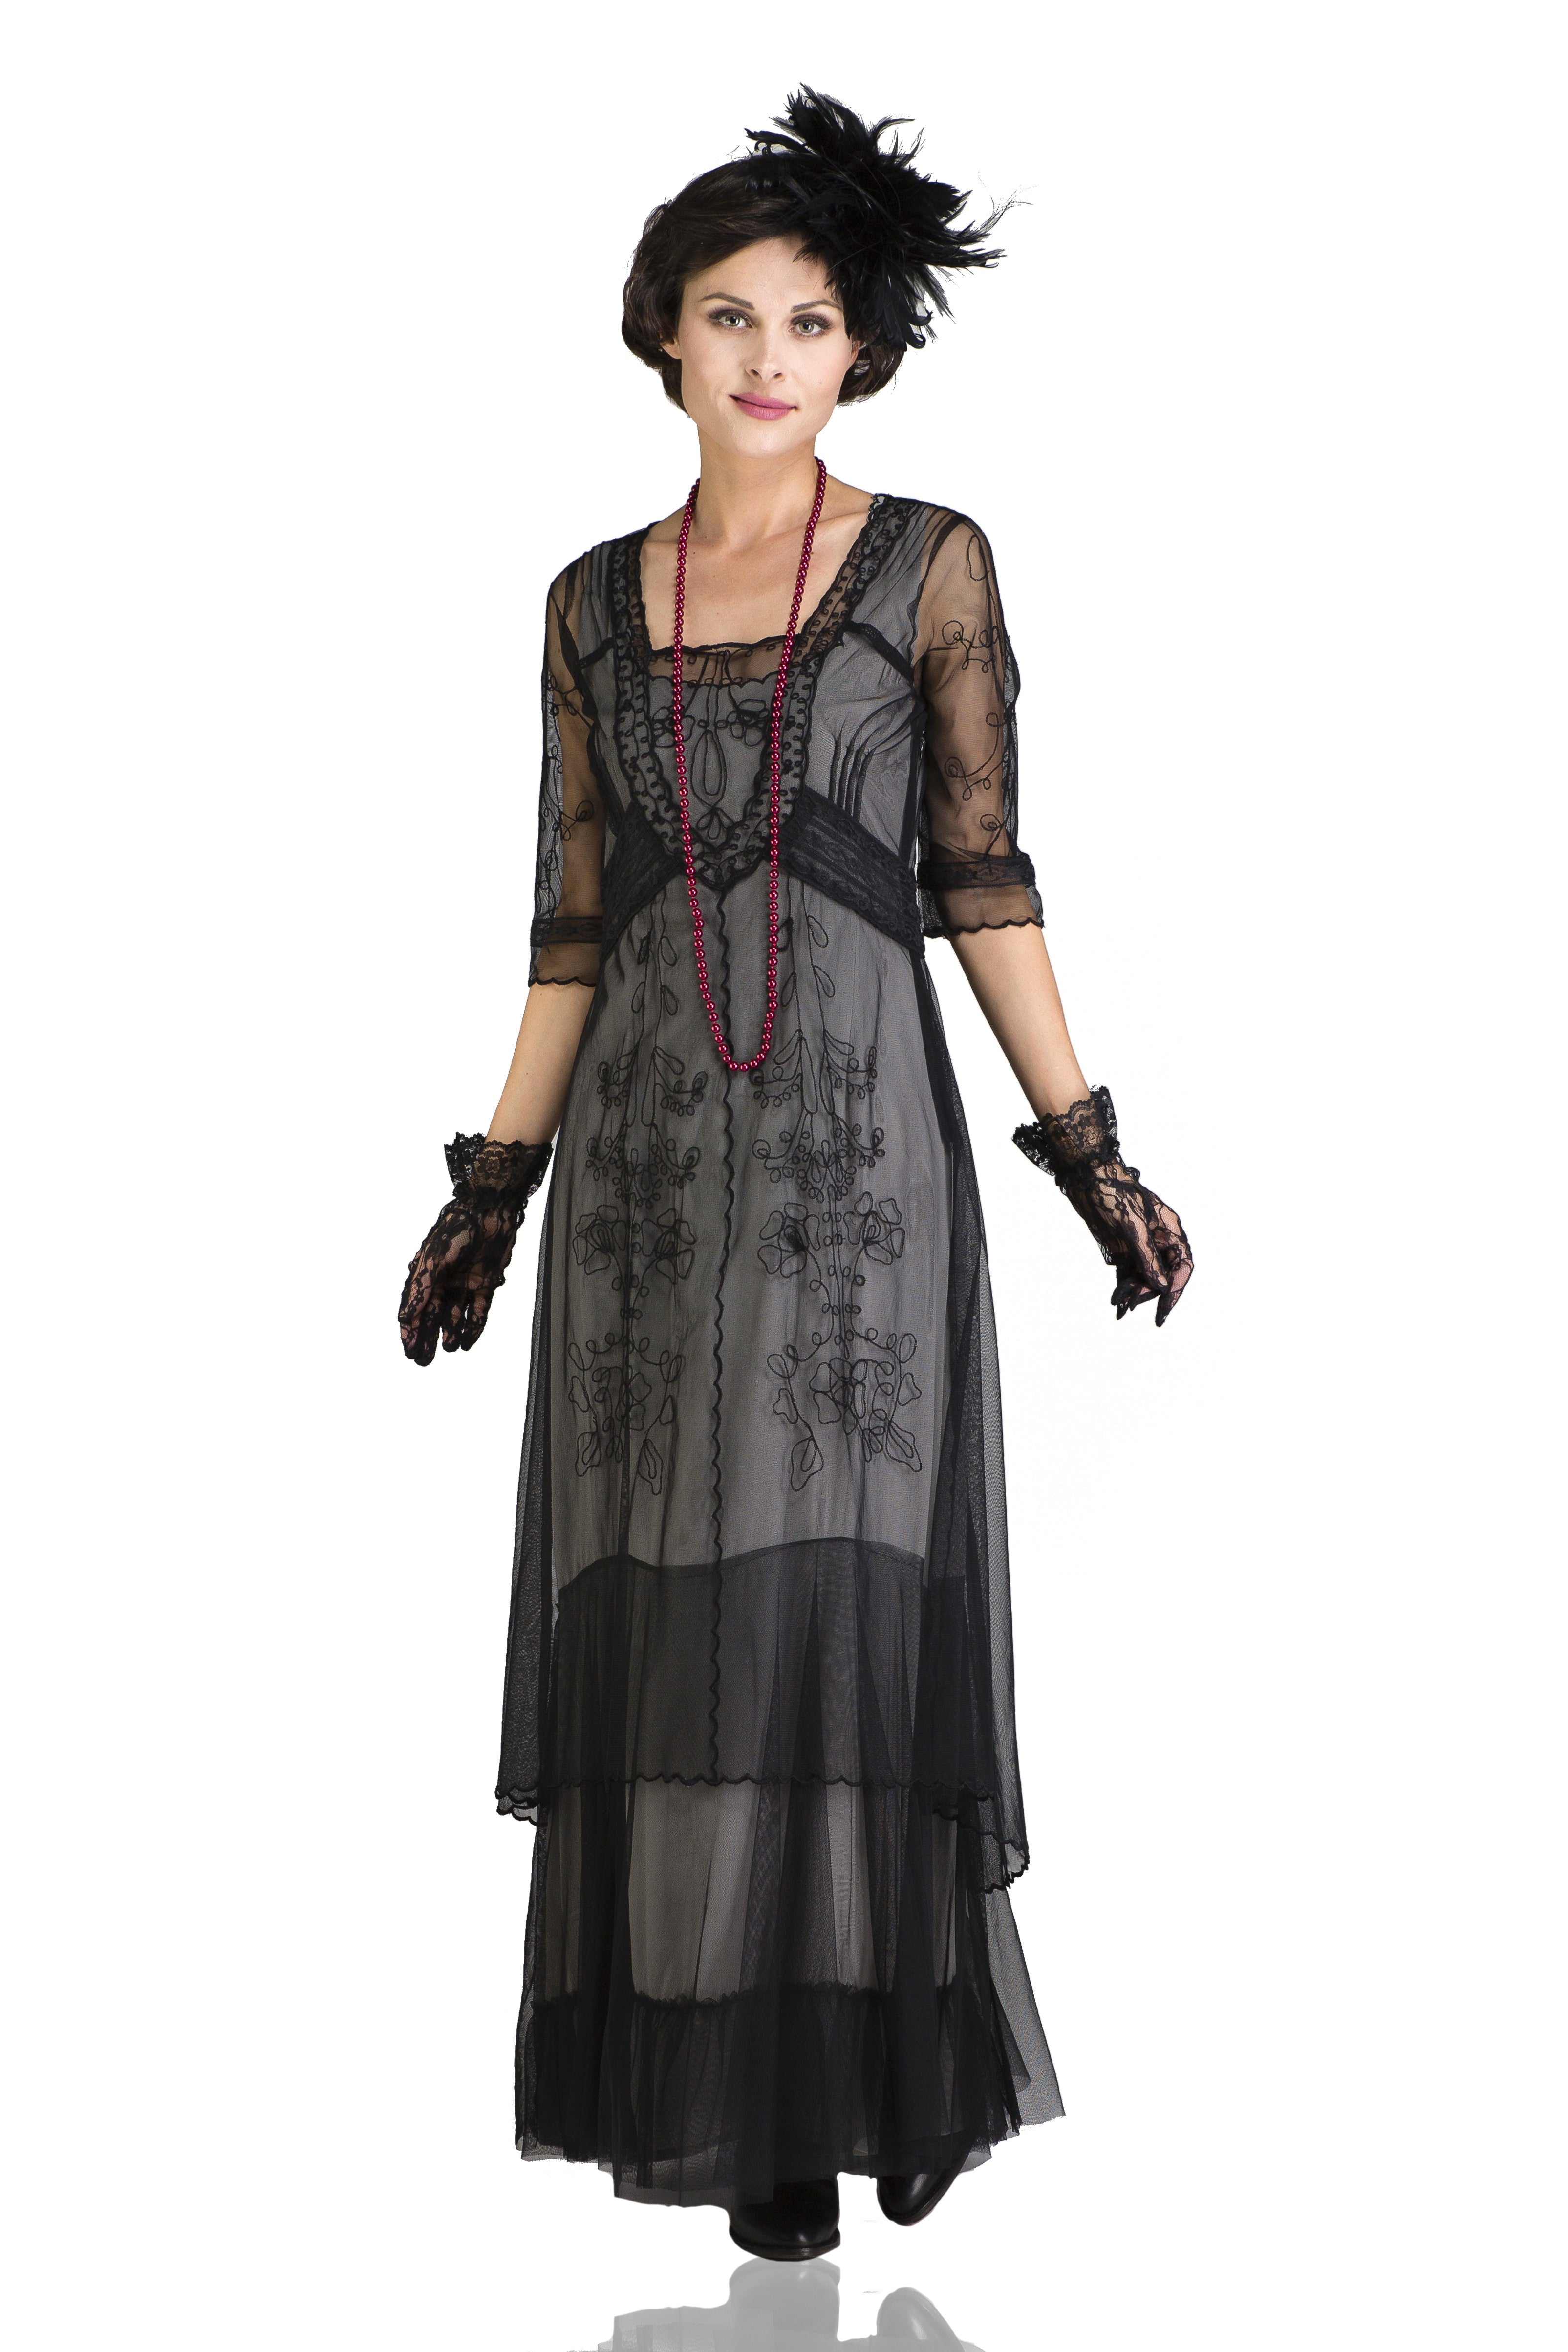 Titanic Dresses & Costumes | 1912 Dresses, Somewhere in Time Victoria Vintage Style Party Gown in Black by Nataya $265.00 AT vintagedancer.com